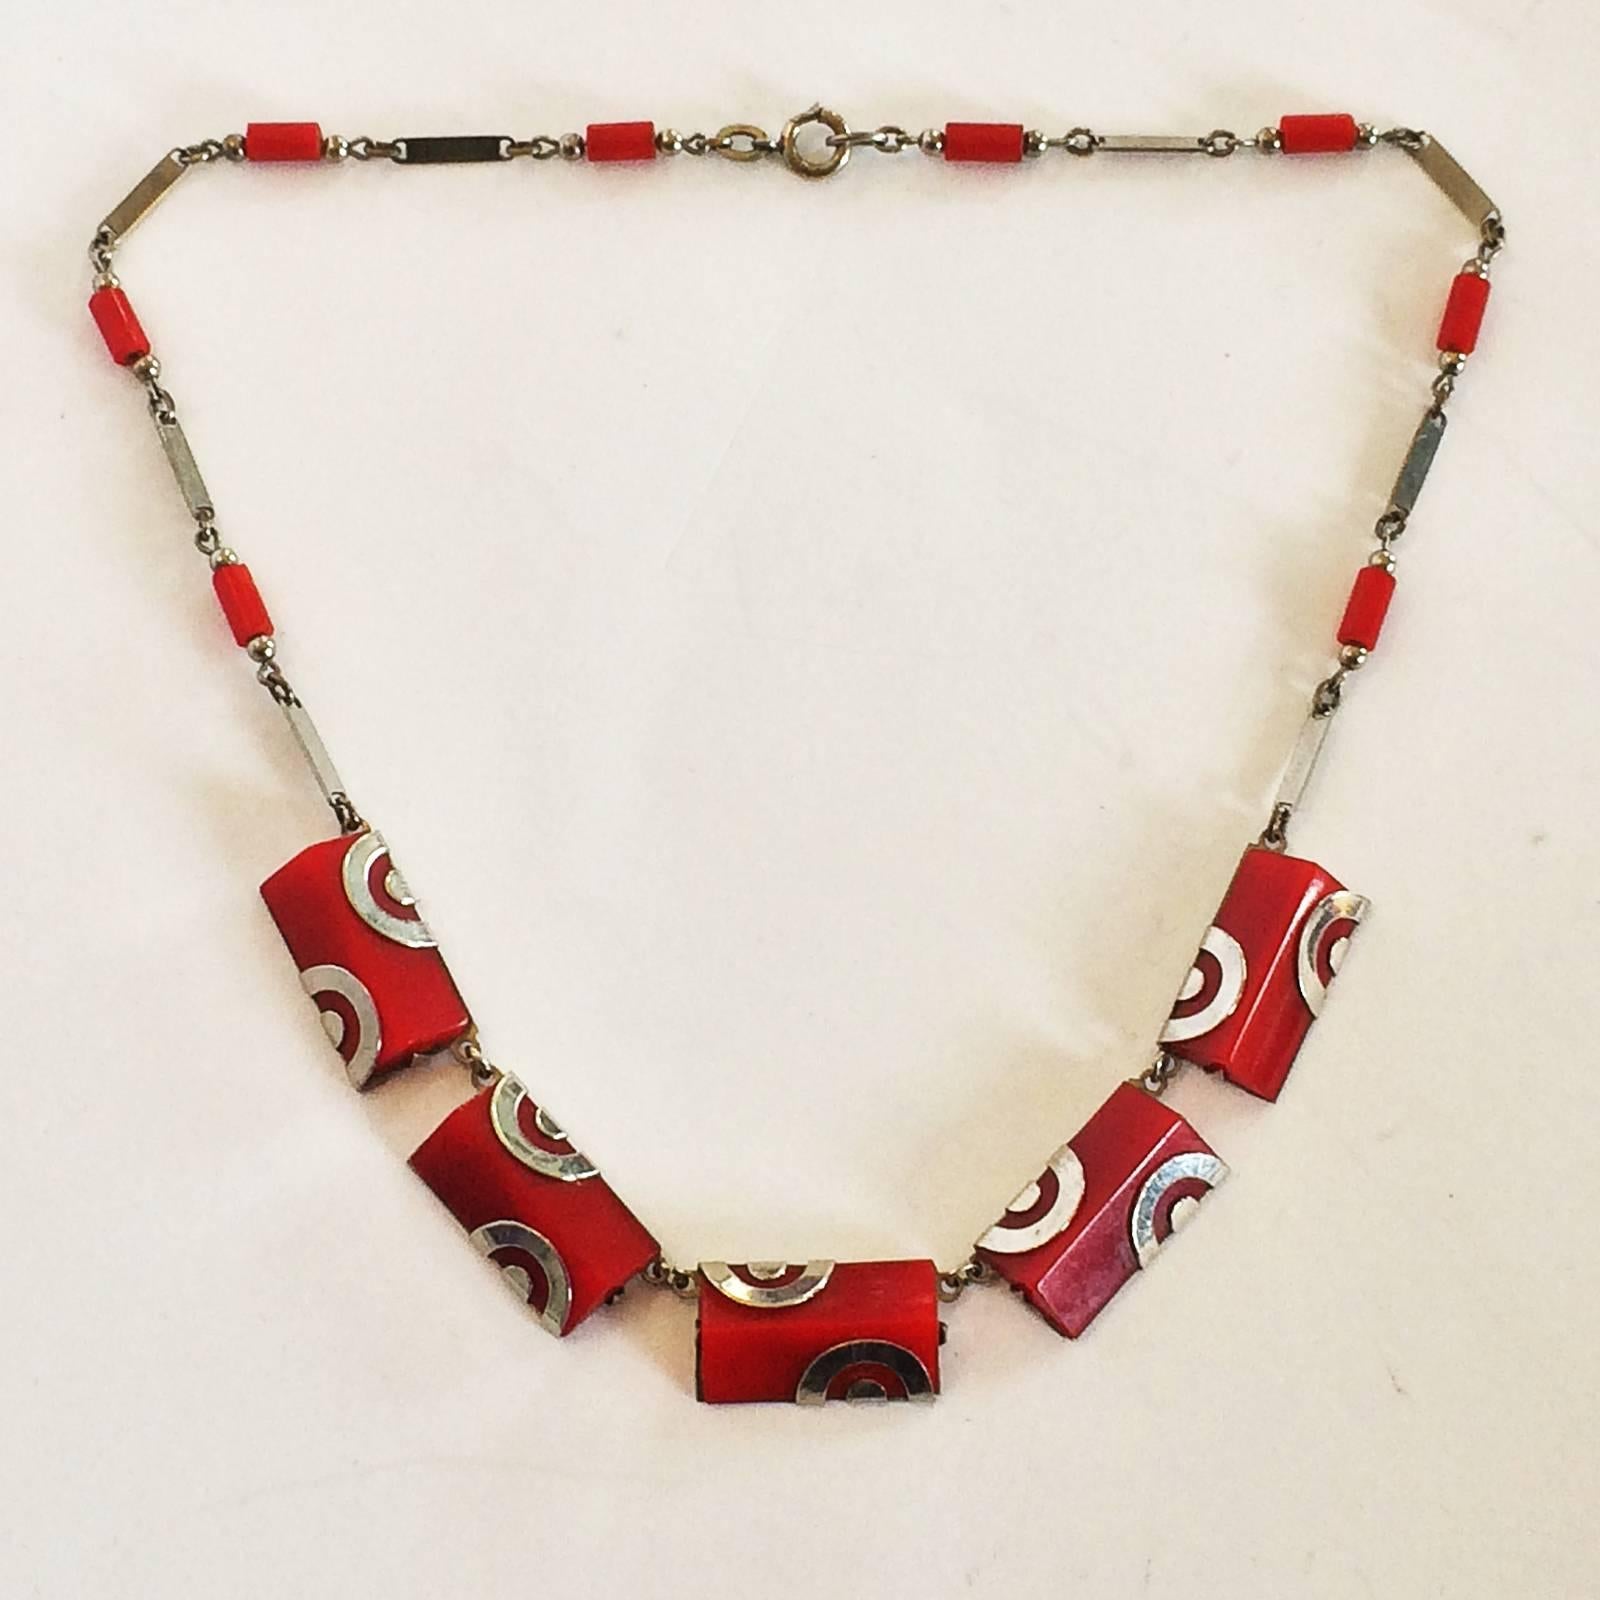 Art Deco Necklace by Jakob Bengel, with cherry red Bakelite/Galalith, set in chrome clasps and chrome clasp and chain. All in excellent condition, with no damage, losses or repairs, the clasp still working as good as new, and a lovely soft patina